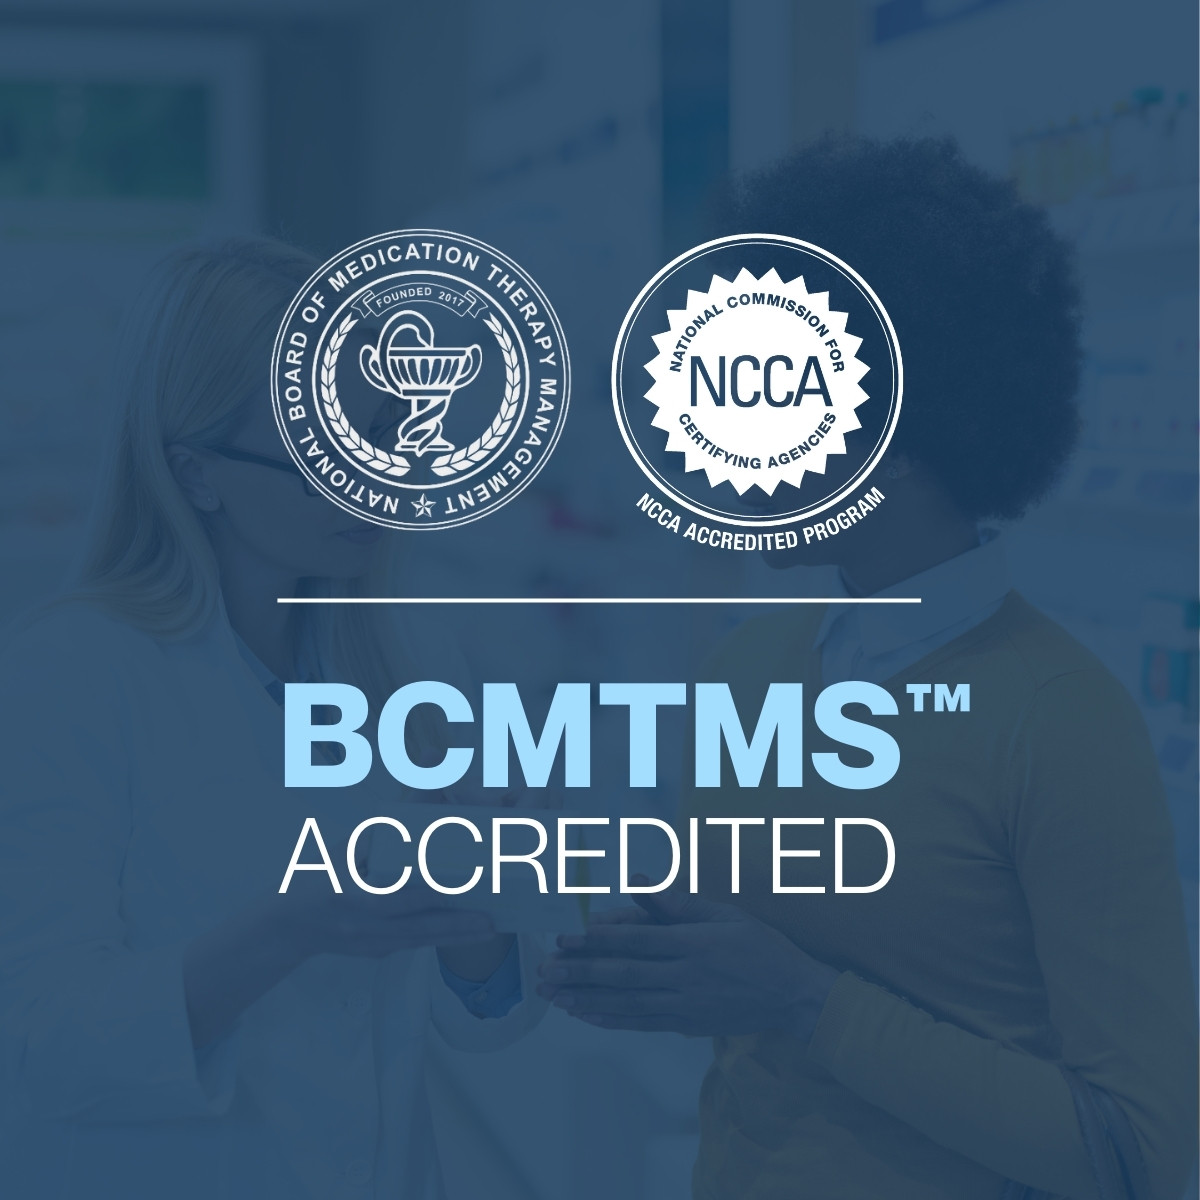 NBMTM’s Board Certification in Medication Therapy Management Joins Elite Group of NCCA-Accredited Programs